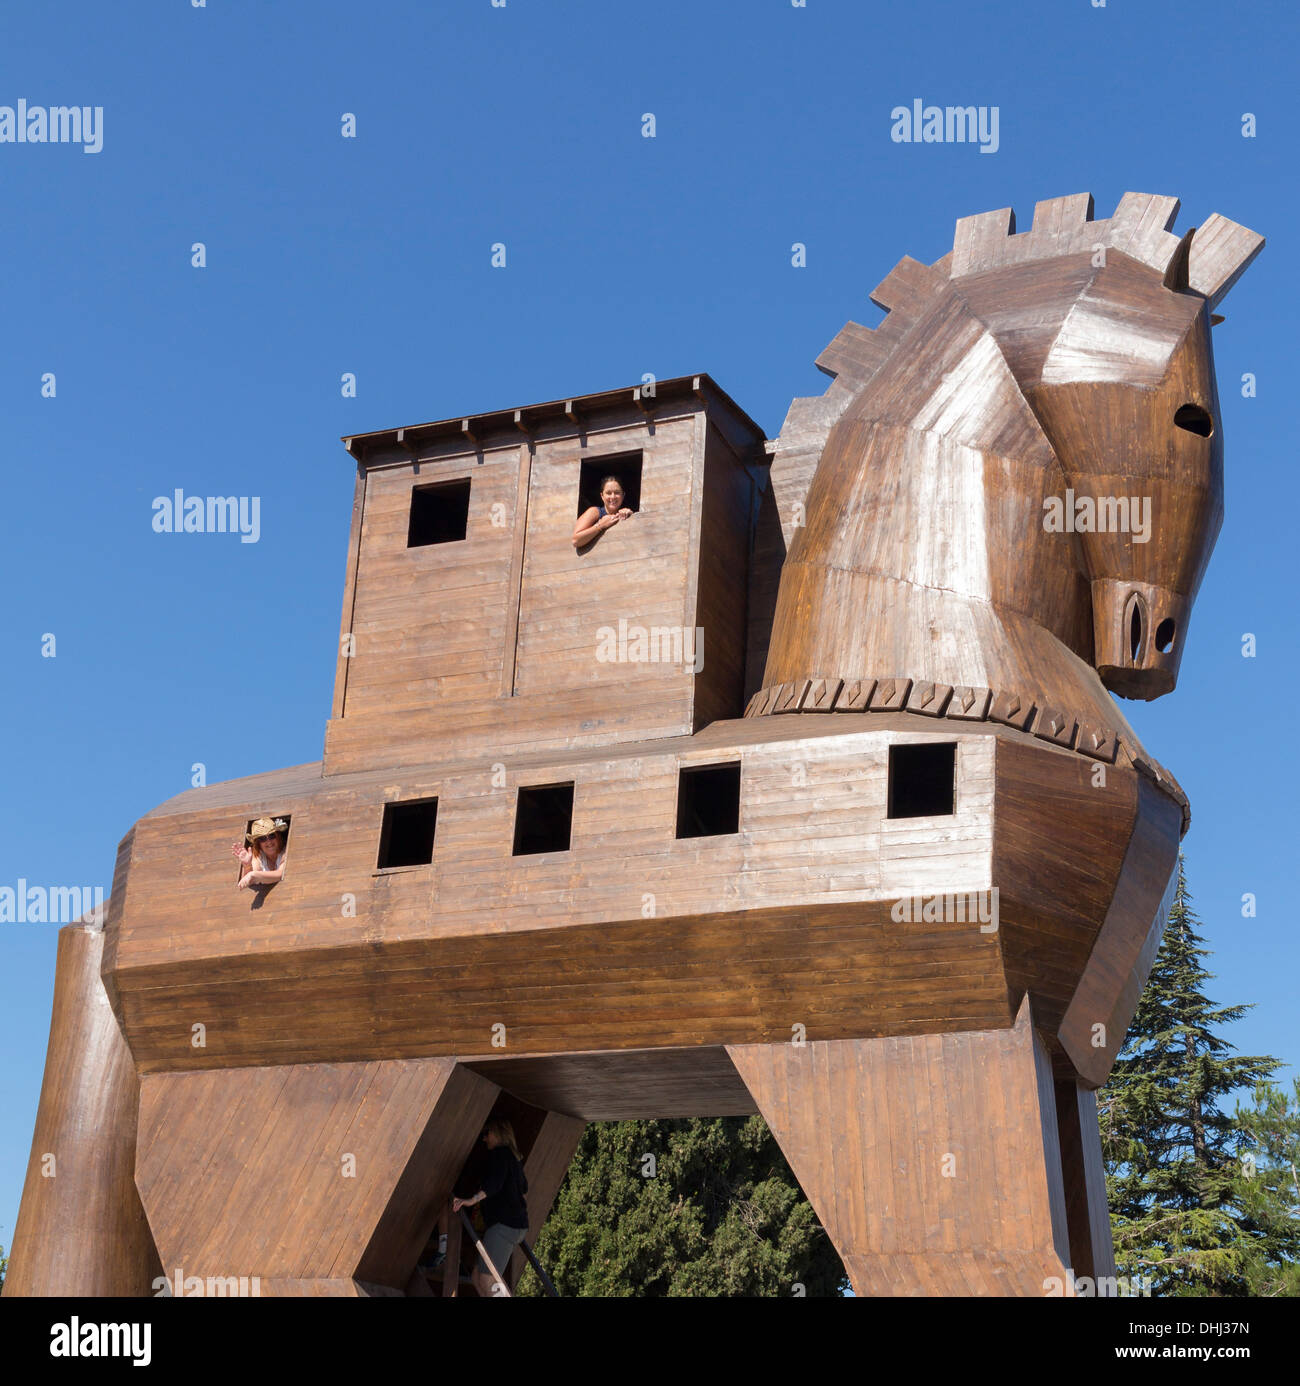 Replica Trojan Horse at the old site of Troy, Turkey Stock Photo